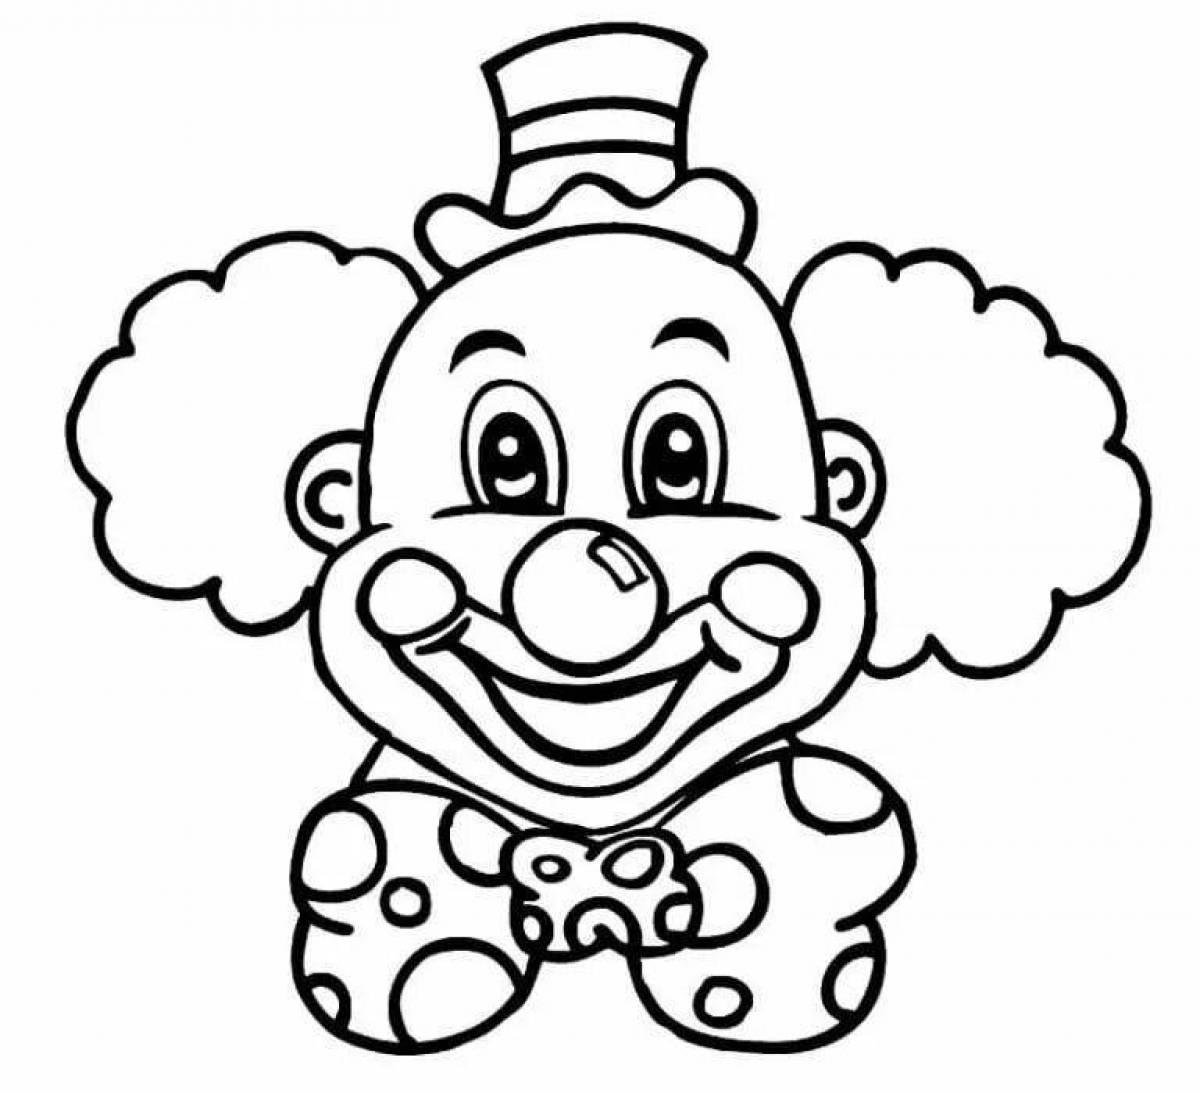 Outrageous funny clown coloring book